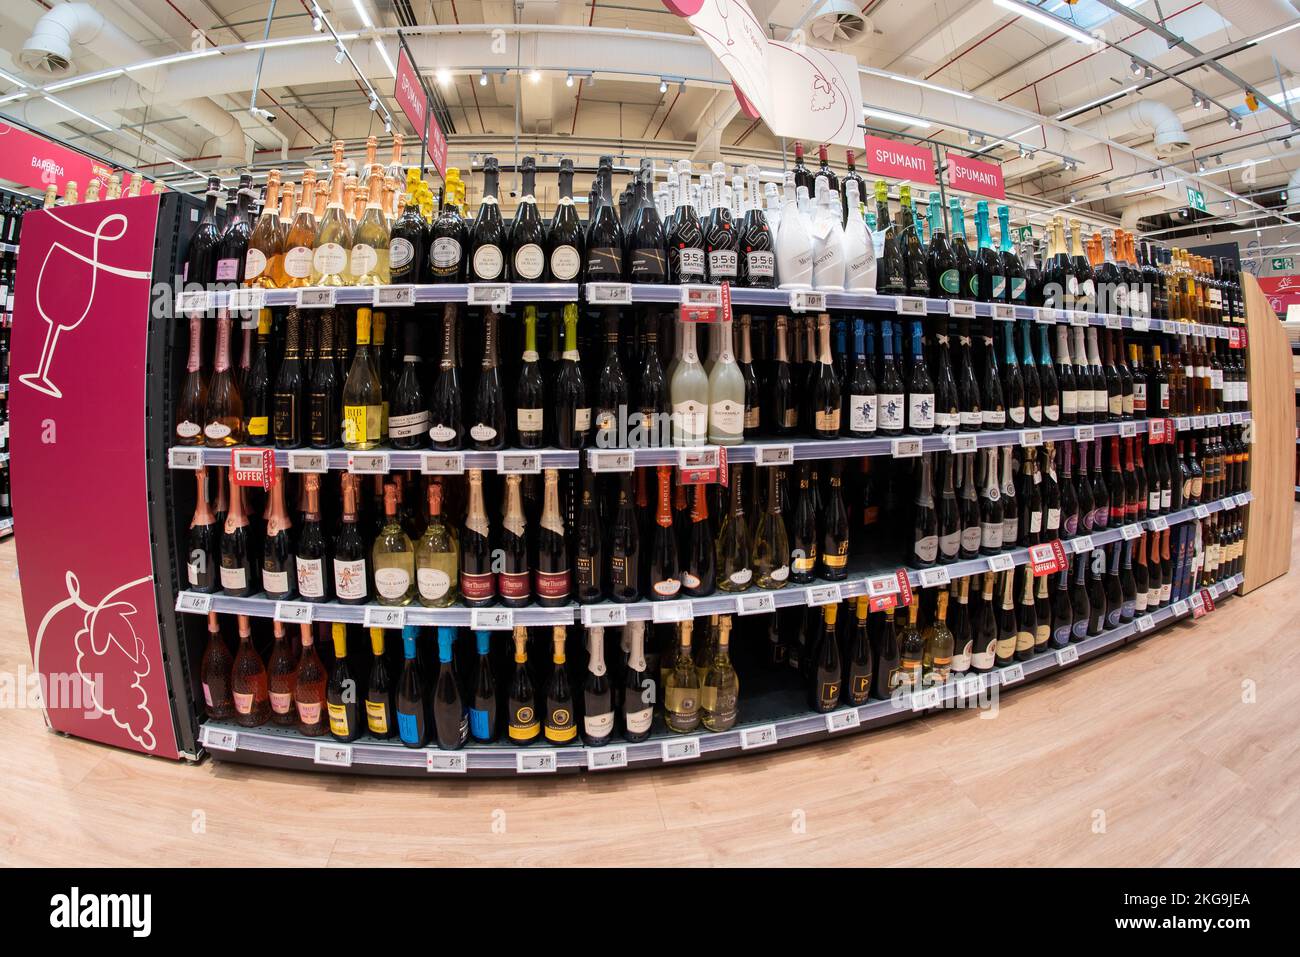 Cuneo, Italy - November 22, 2022: Assortment of sparkling wine bottles on displayed on shelf for sale in Italian supermarket, fish eye vision Stock Photo